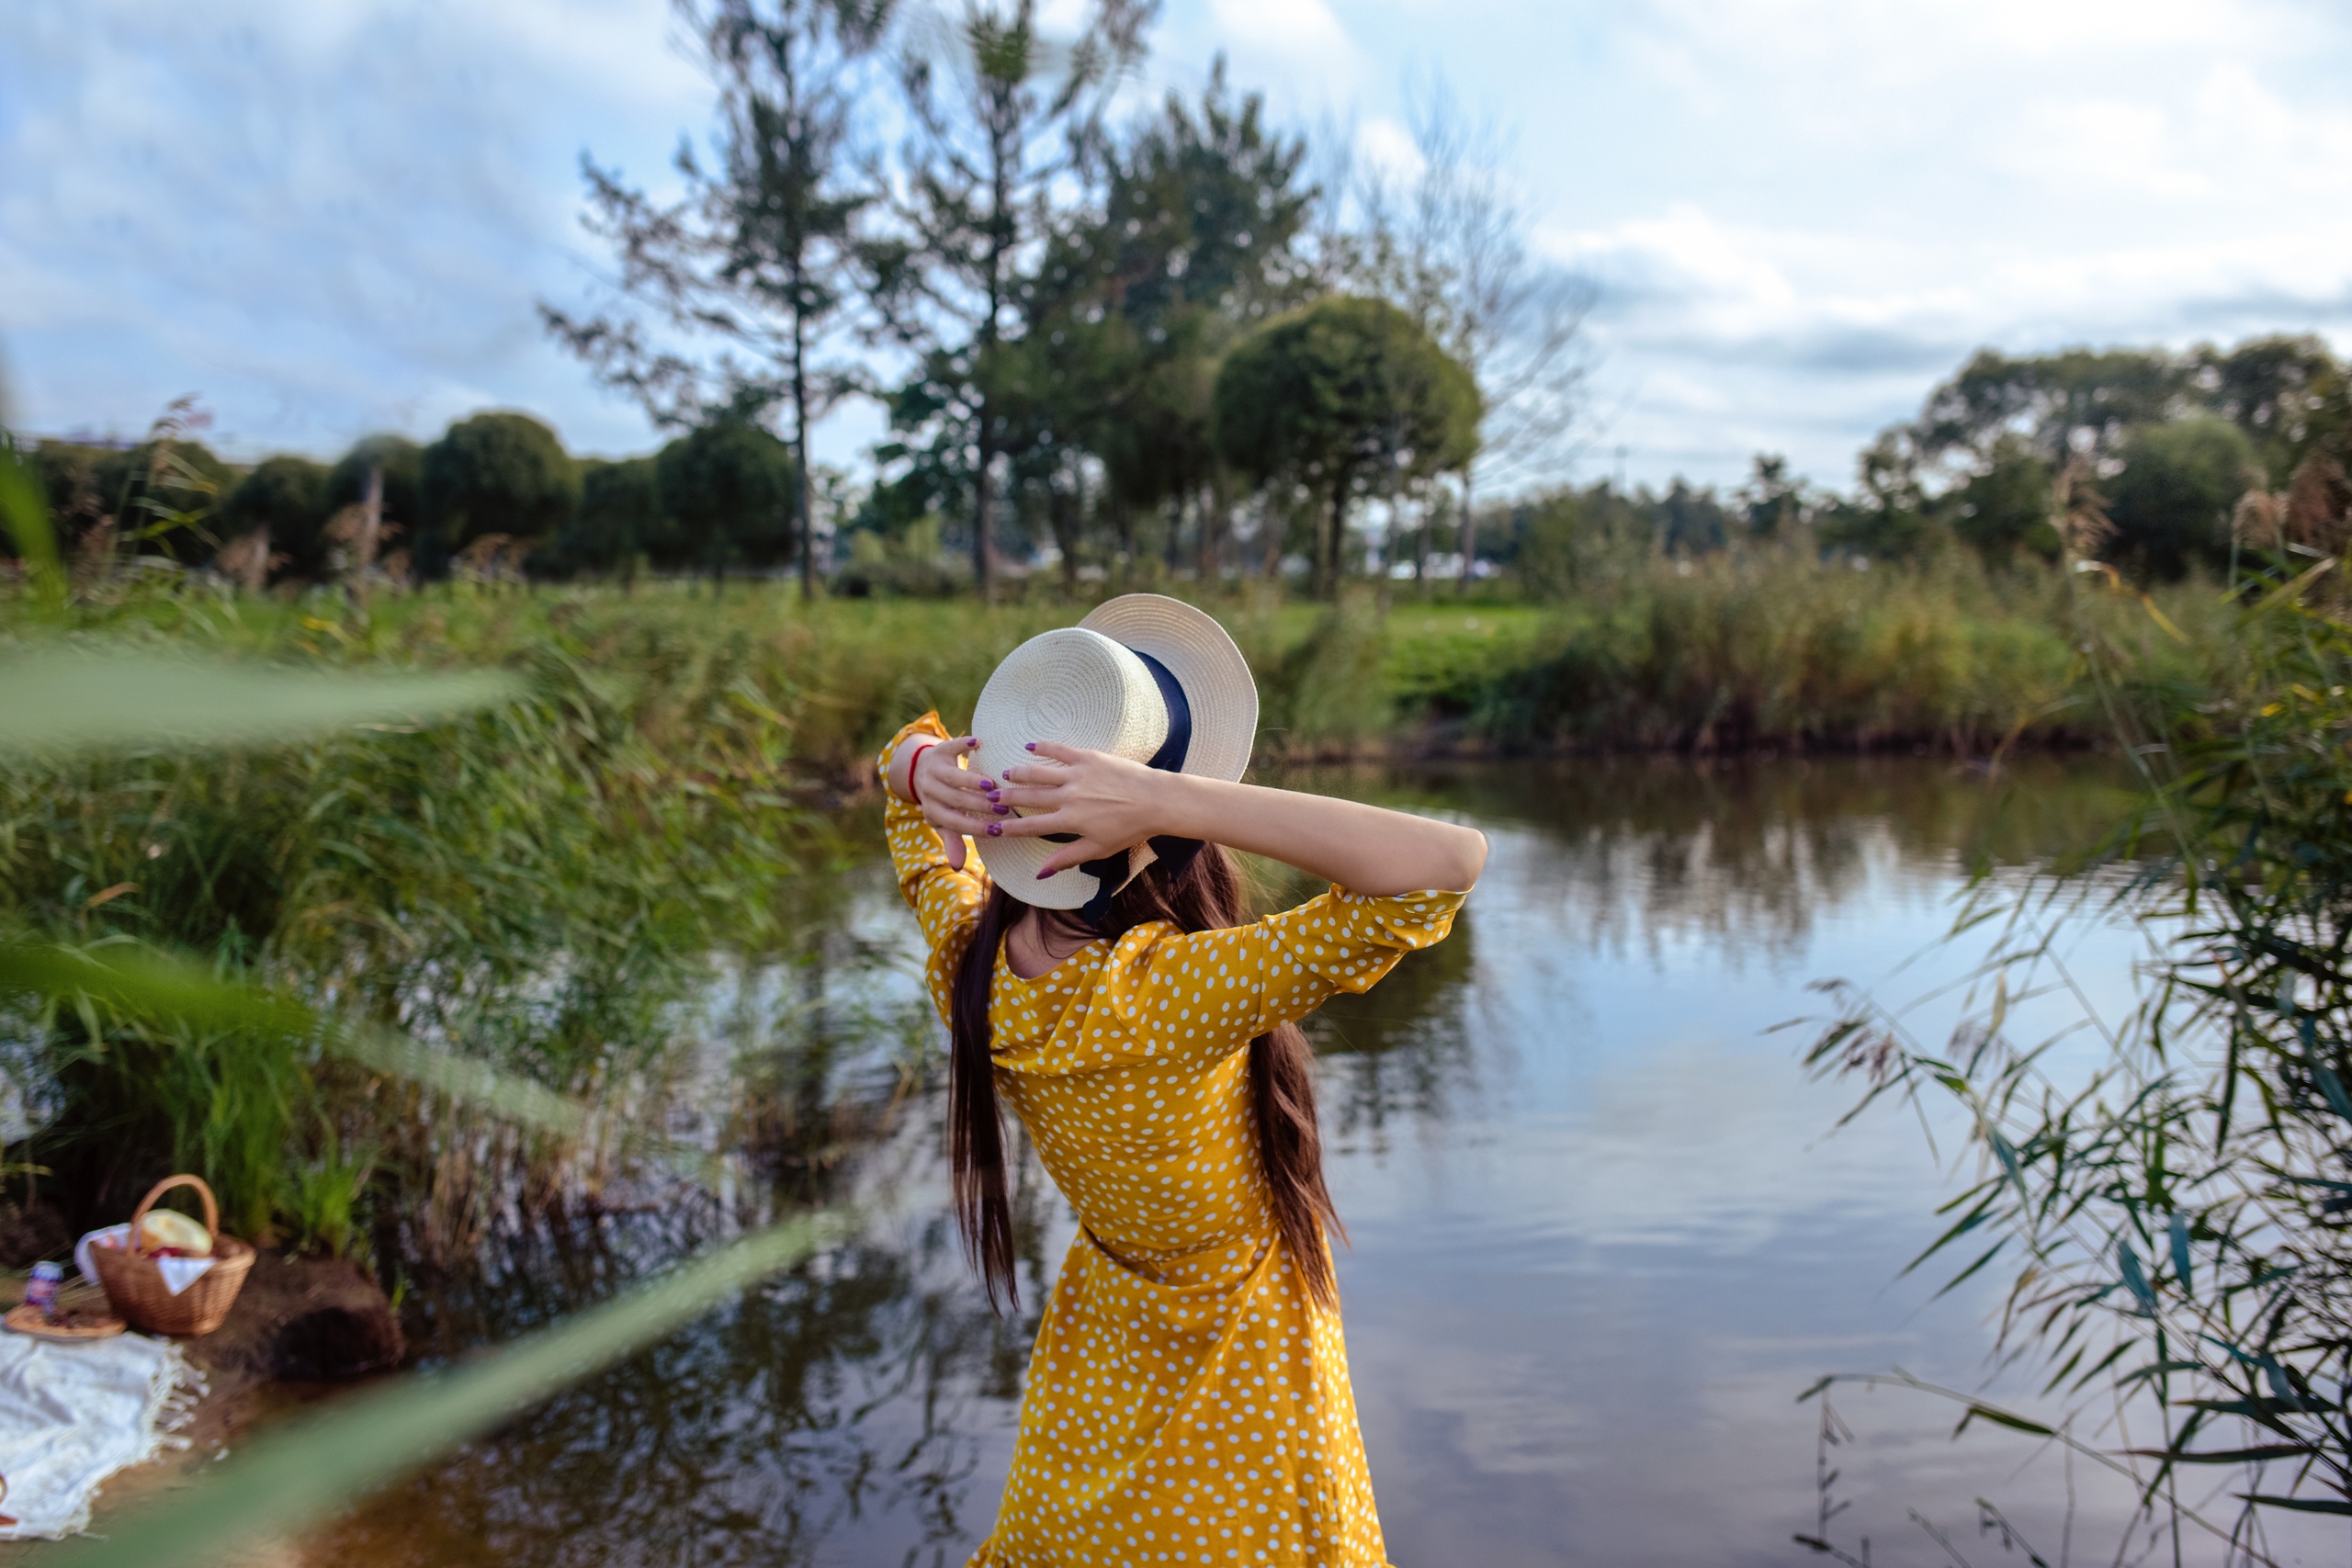 People 2560x1707 women model brunette dress yellow dress hat women with hats picnic baskets outdoors depth of field lagoon painted nails back women outdoors long hair water trees